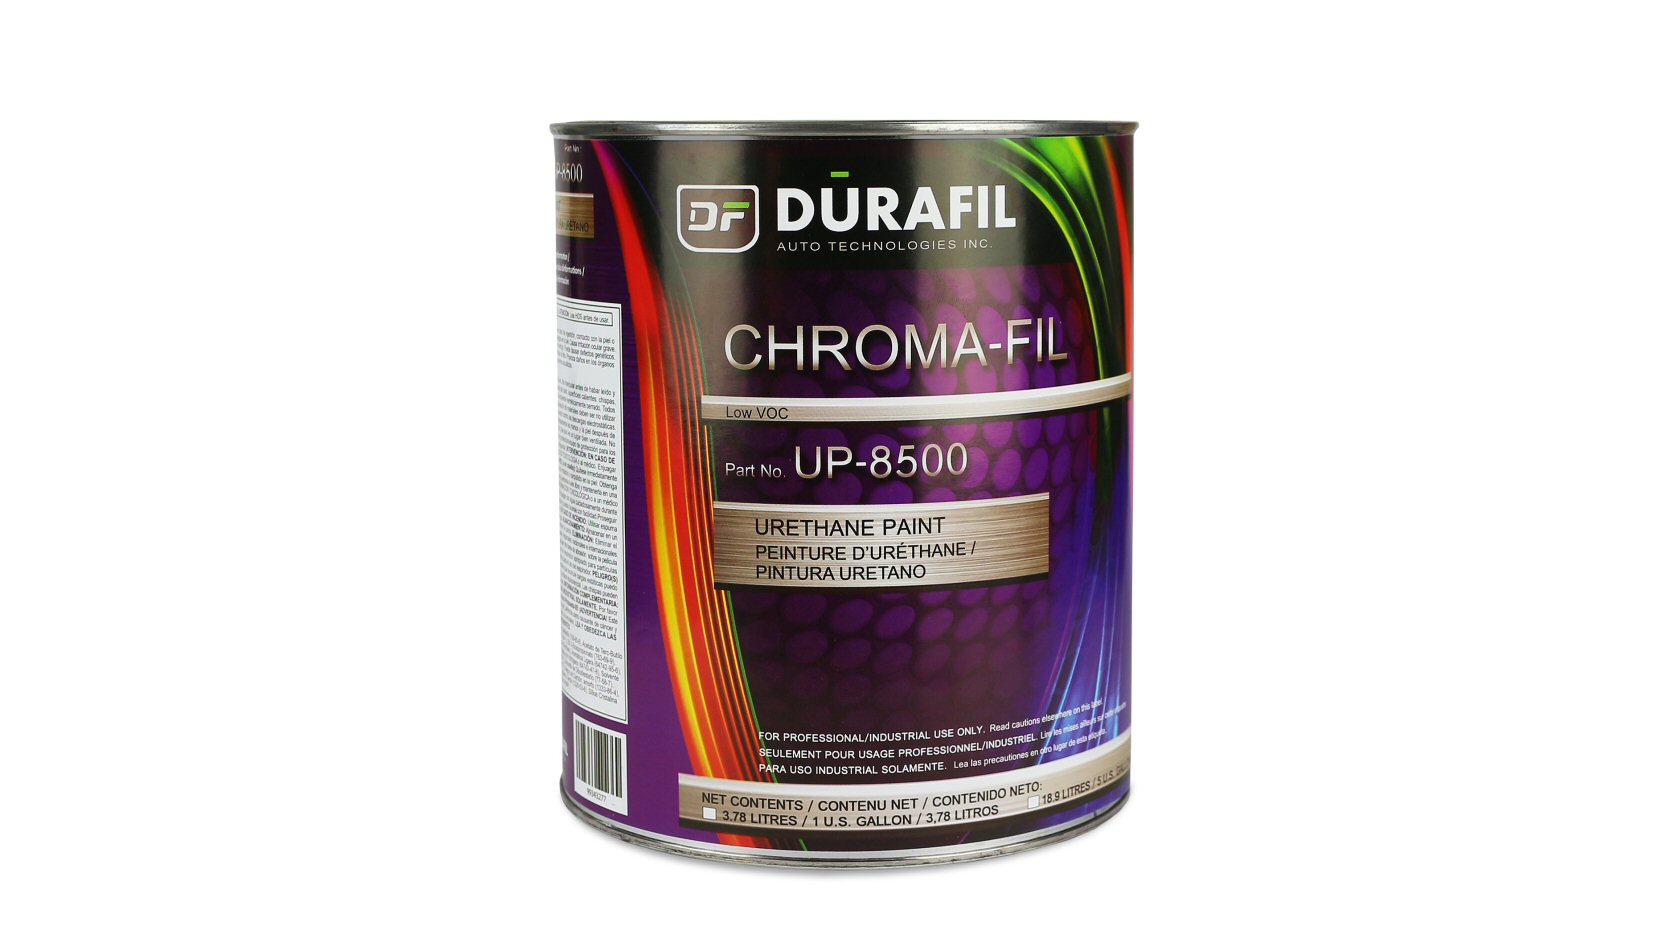 UP-8500 Chroma-Fil Single Stage Urethane Paint – Green / Orange / Red / Yellow / Bright Colors